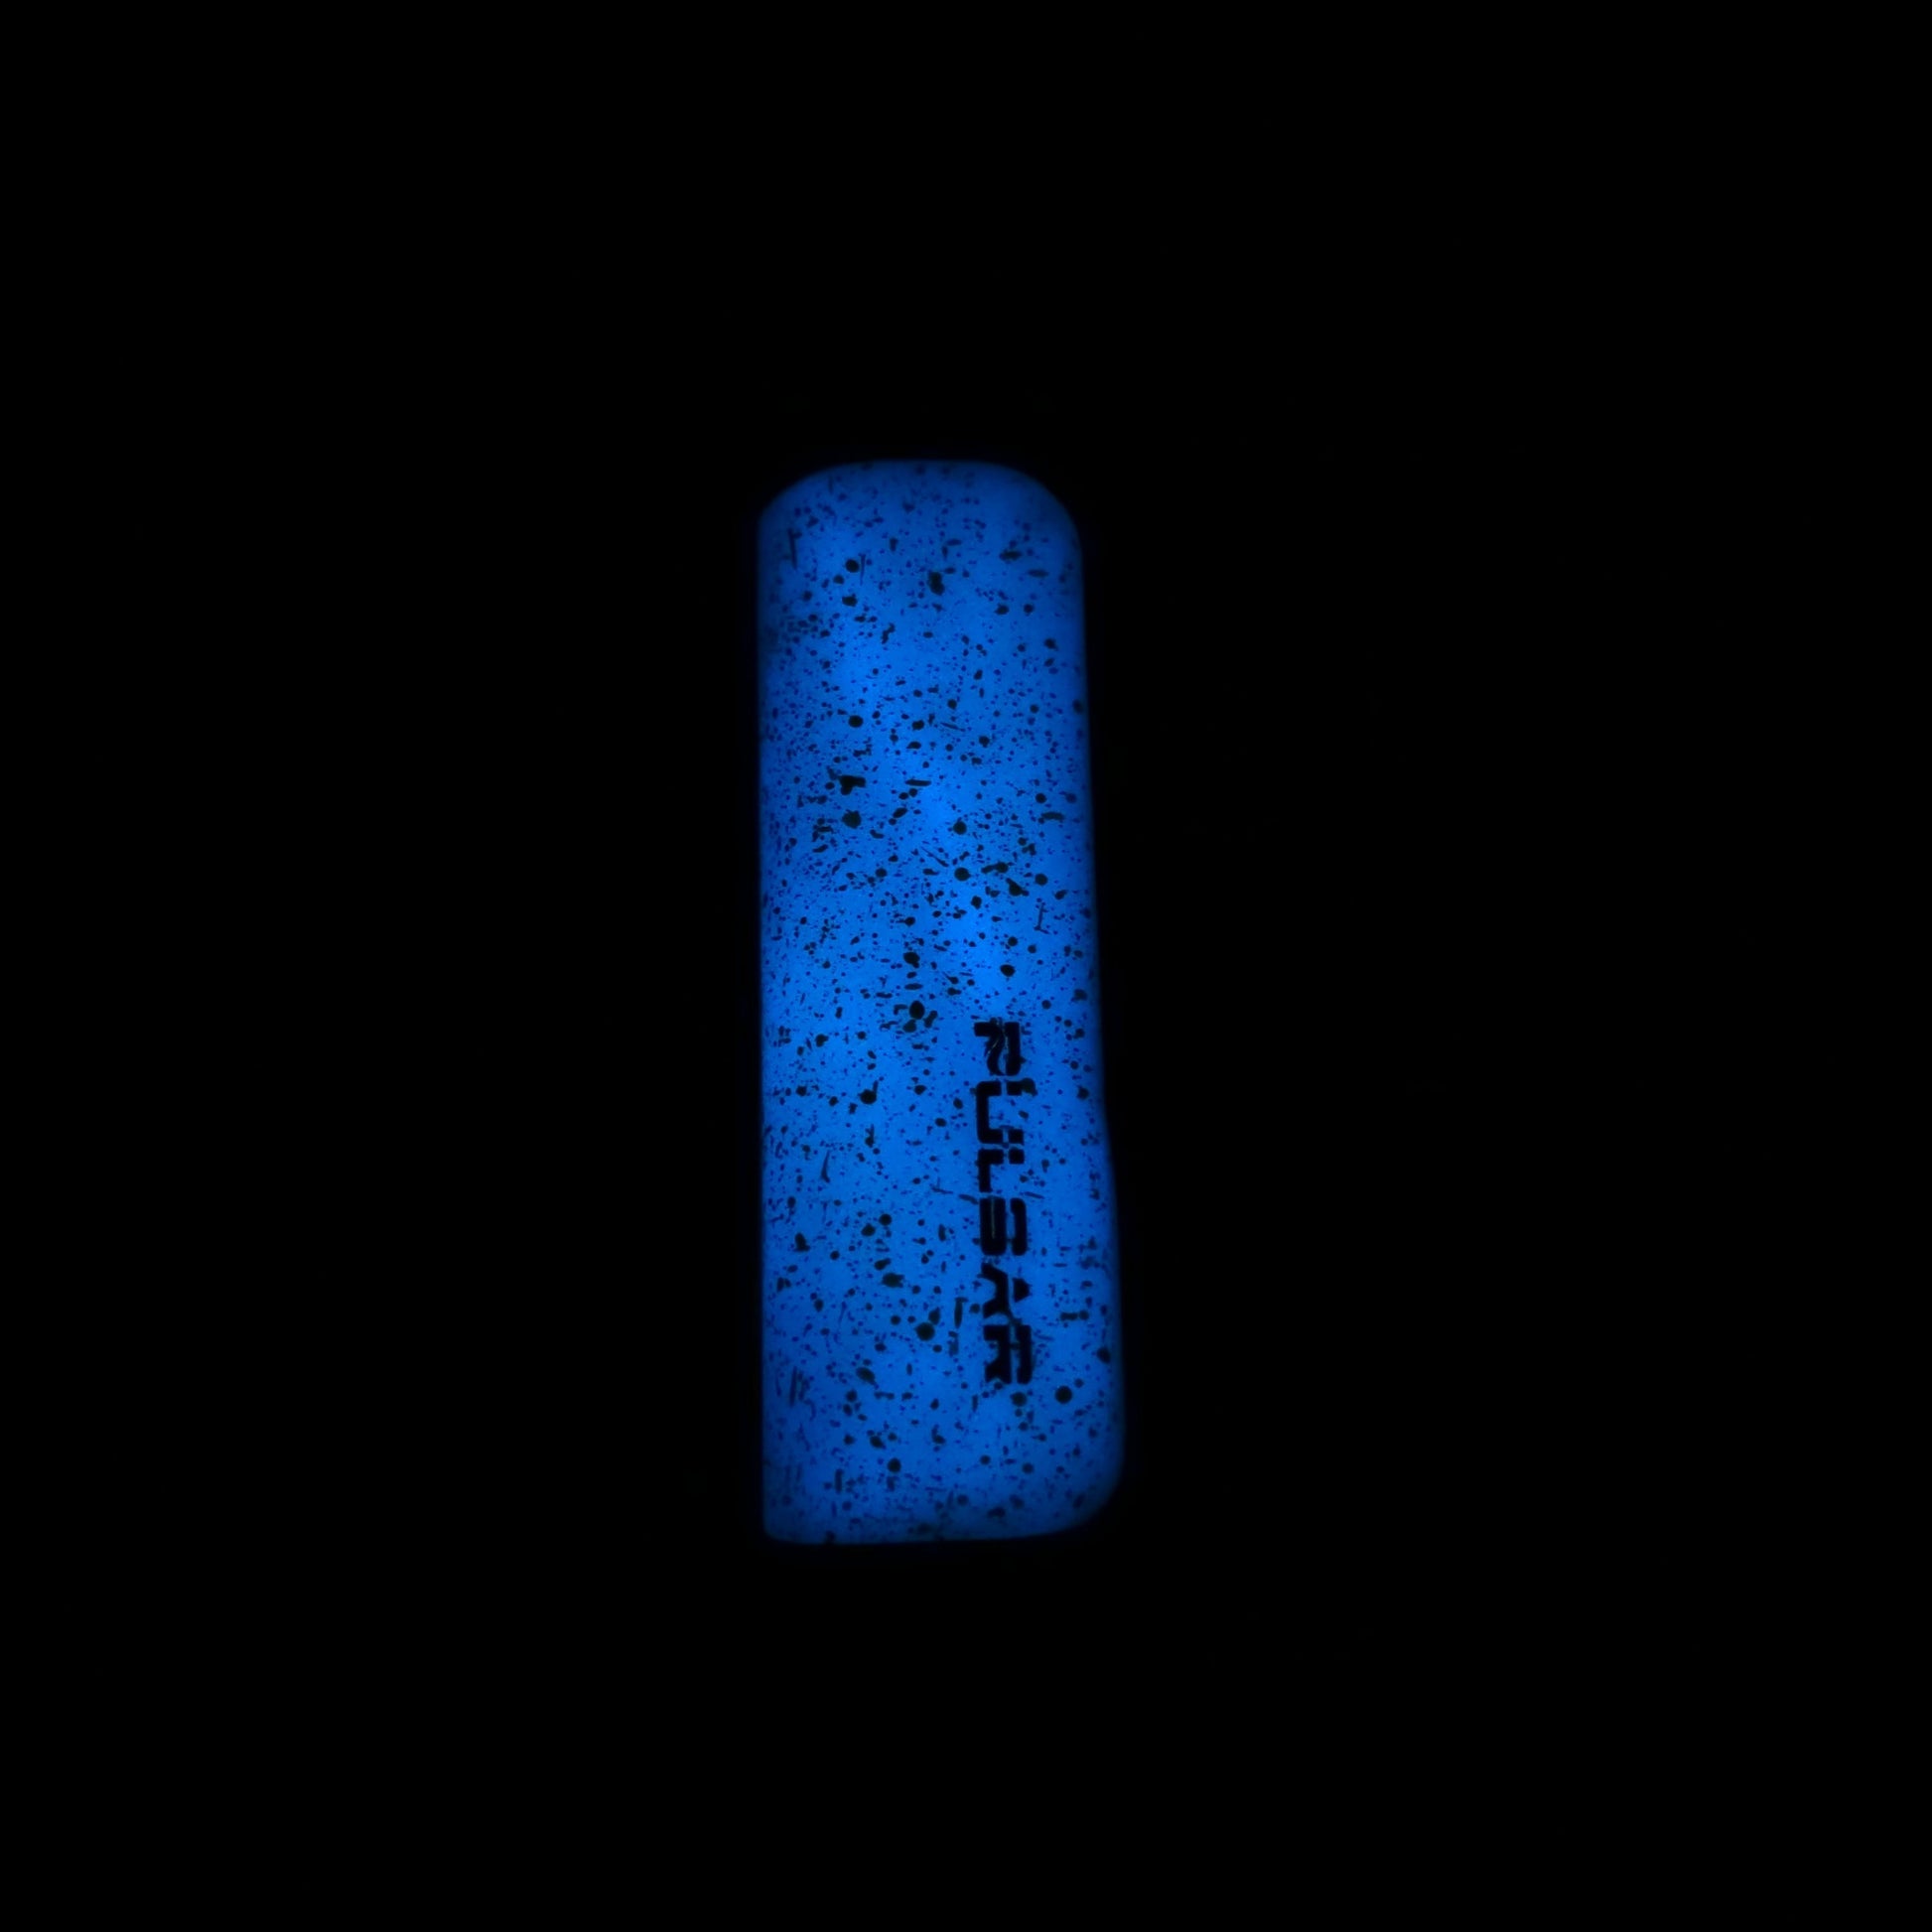 Pulsar Mobi 510 Battery | 650mAh - Glow in the dark with lights off